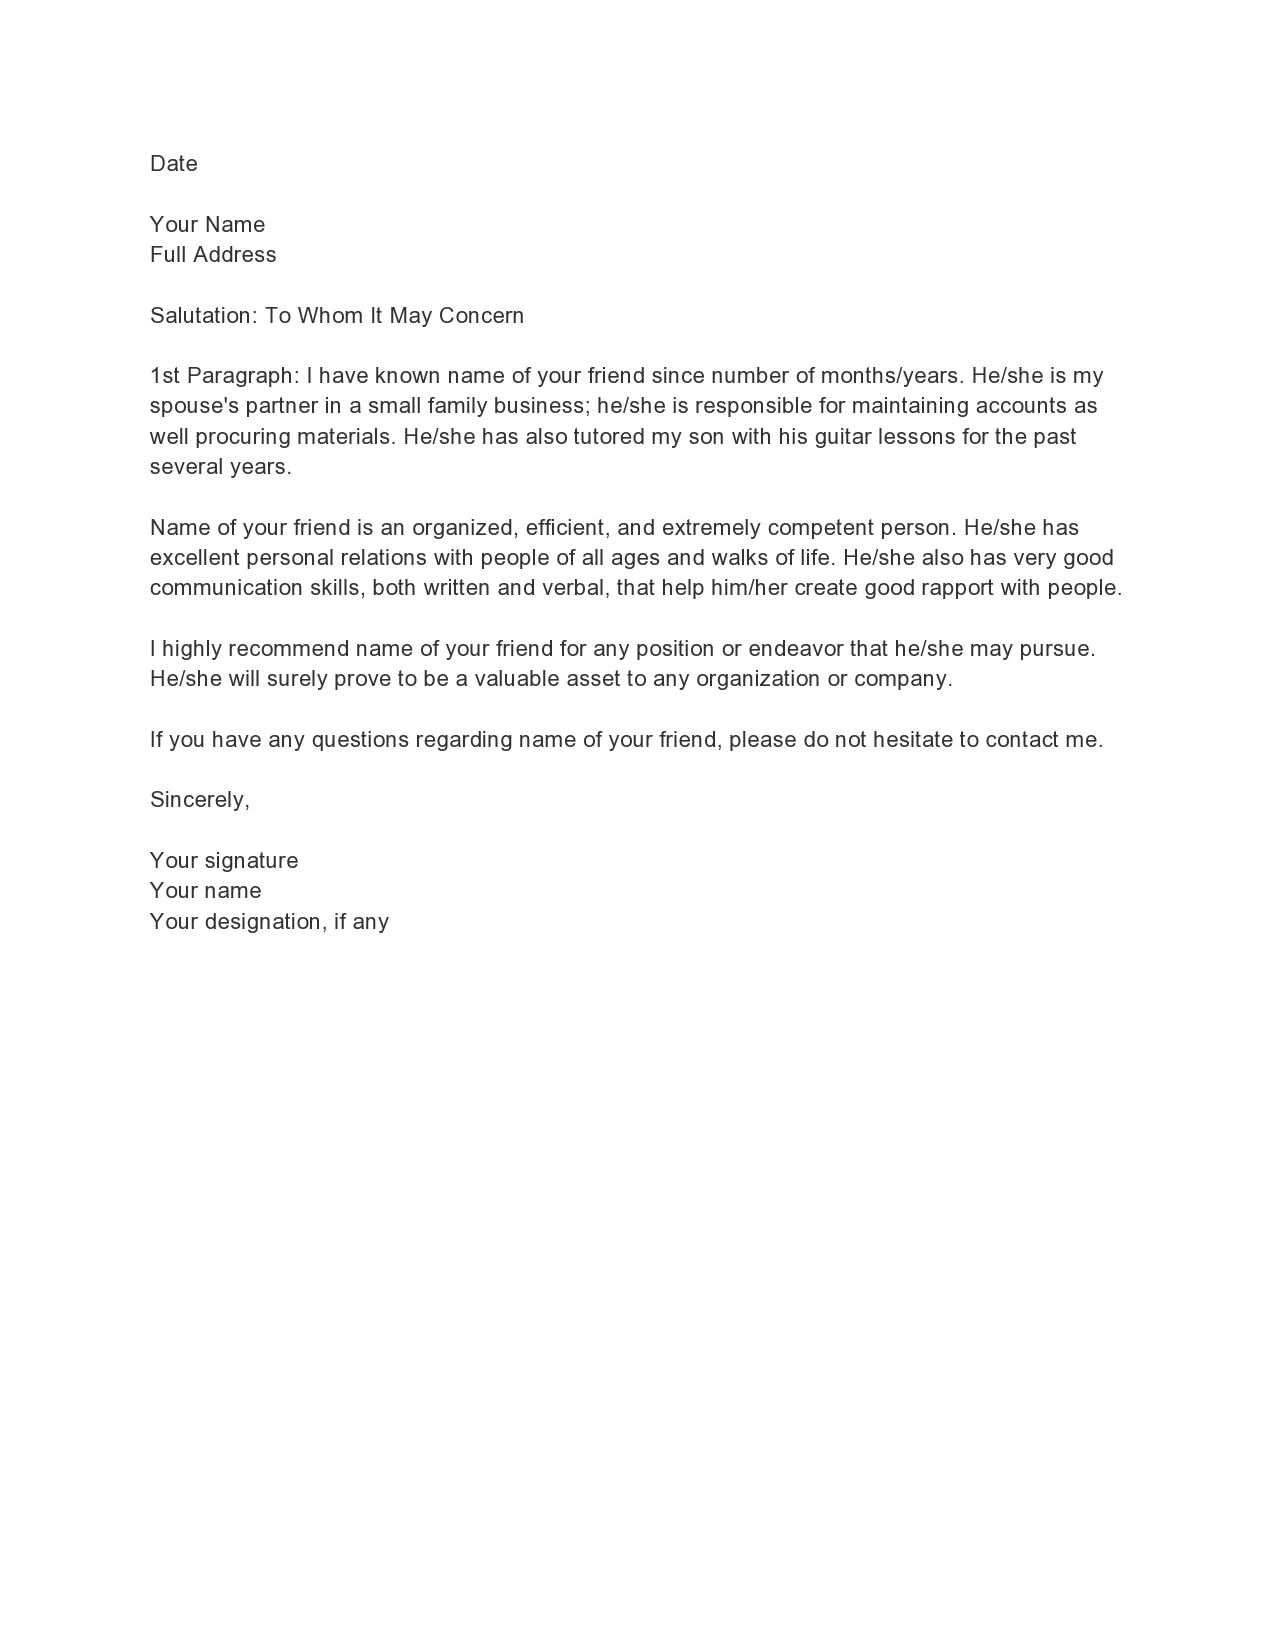 Personal Recommendation Letter Samples For A Friend from templatearchive.com